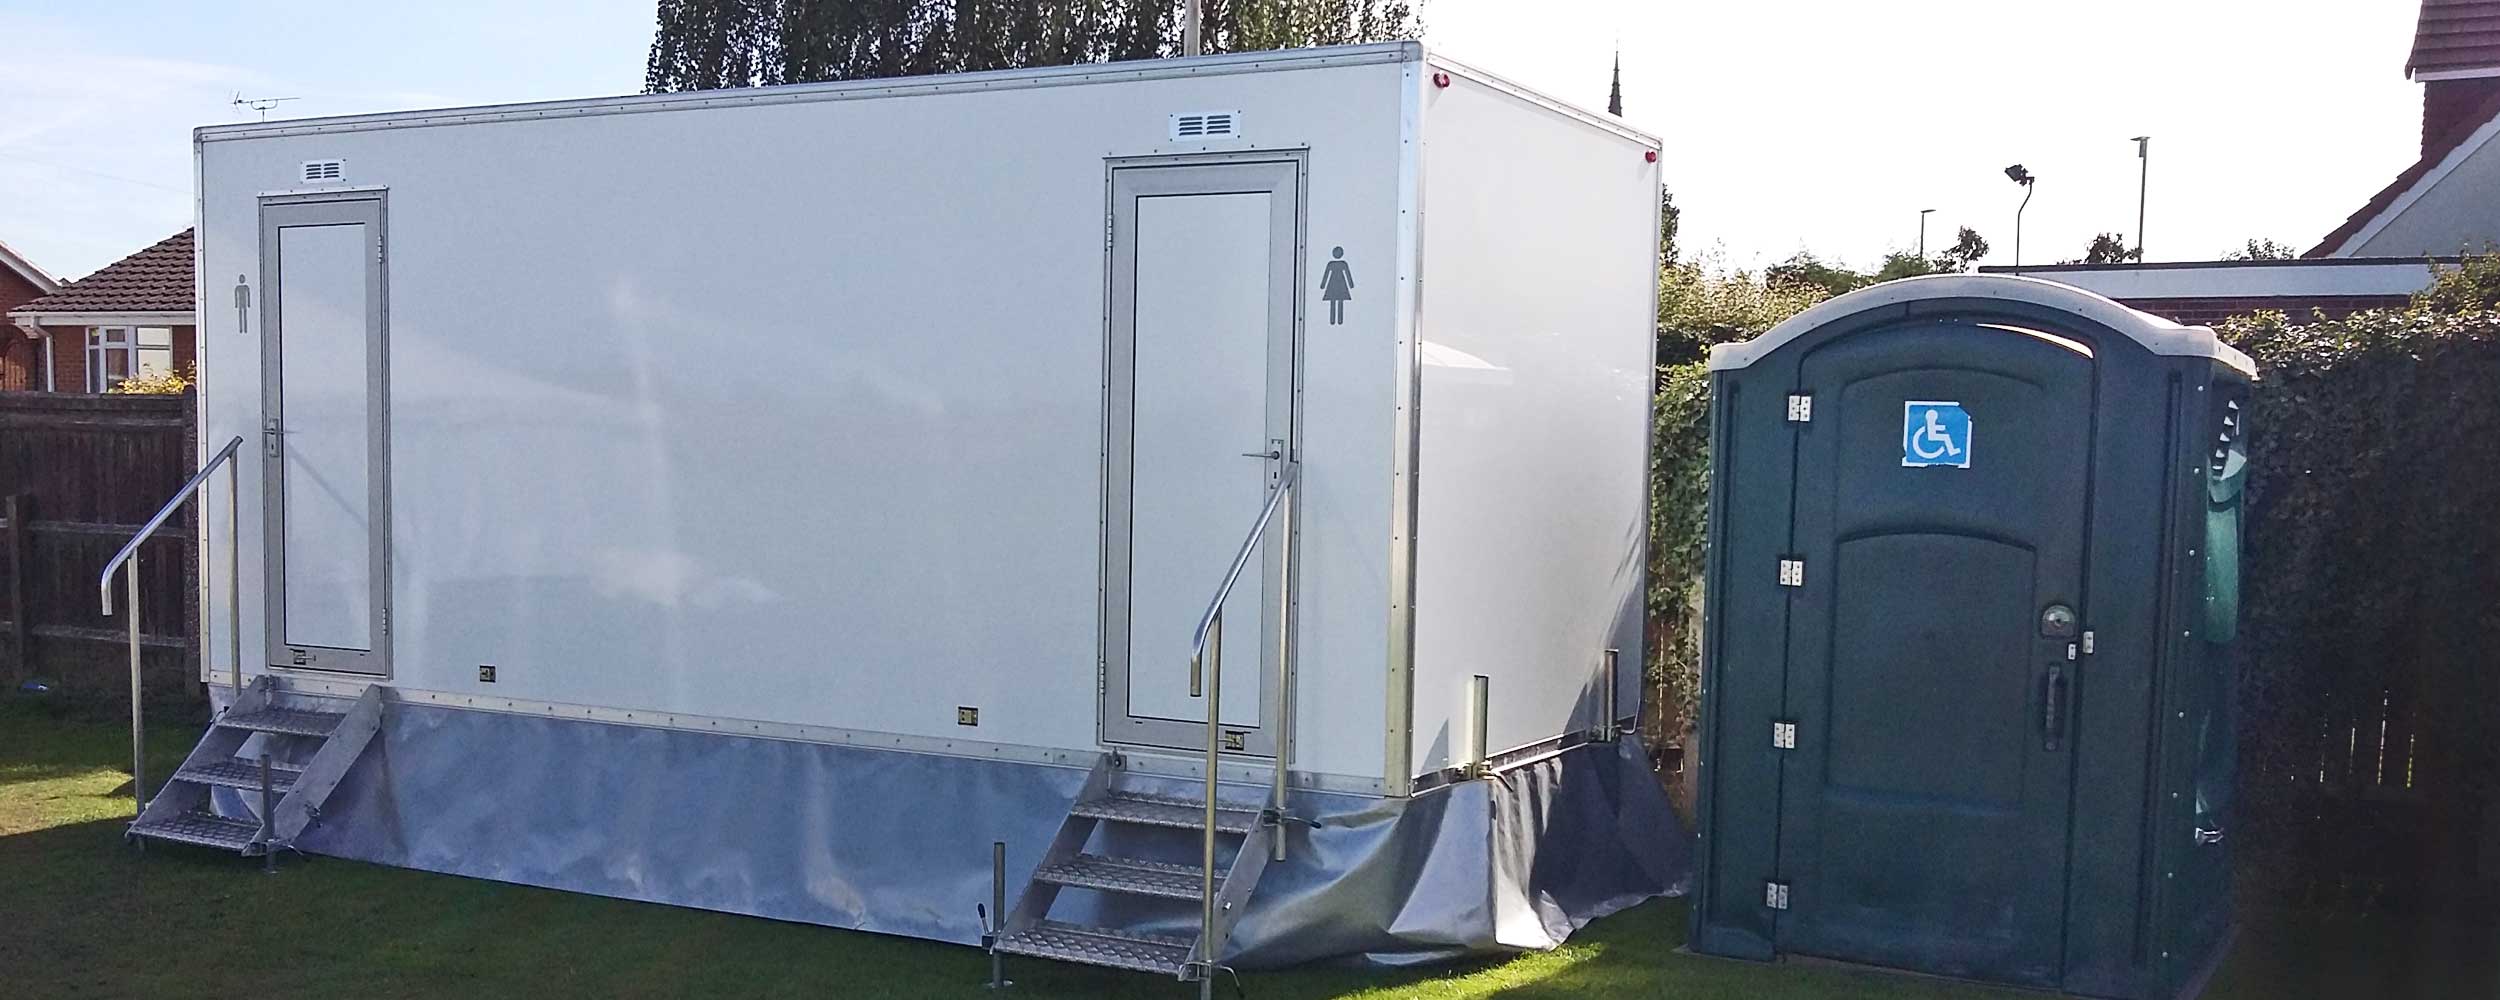 disabled portaloo toilets for hire in East Midlands